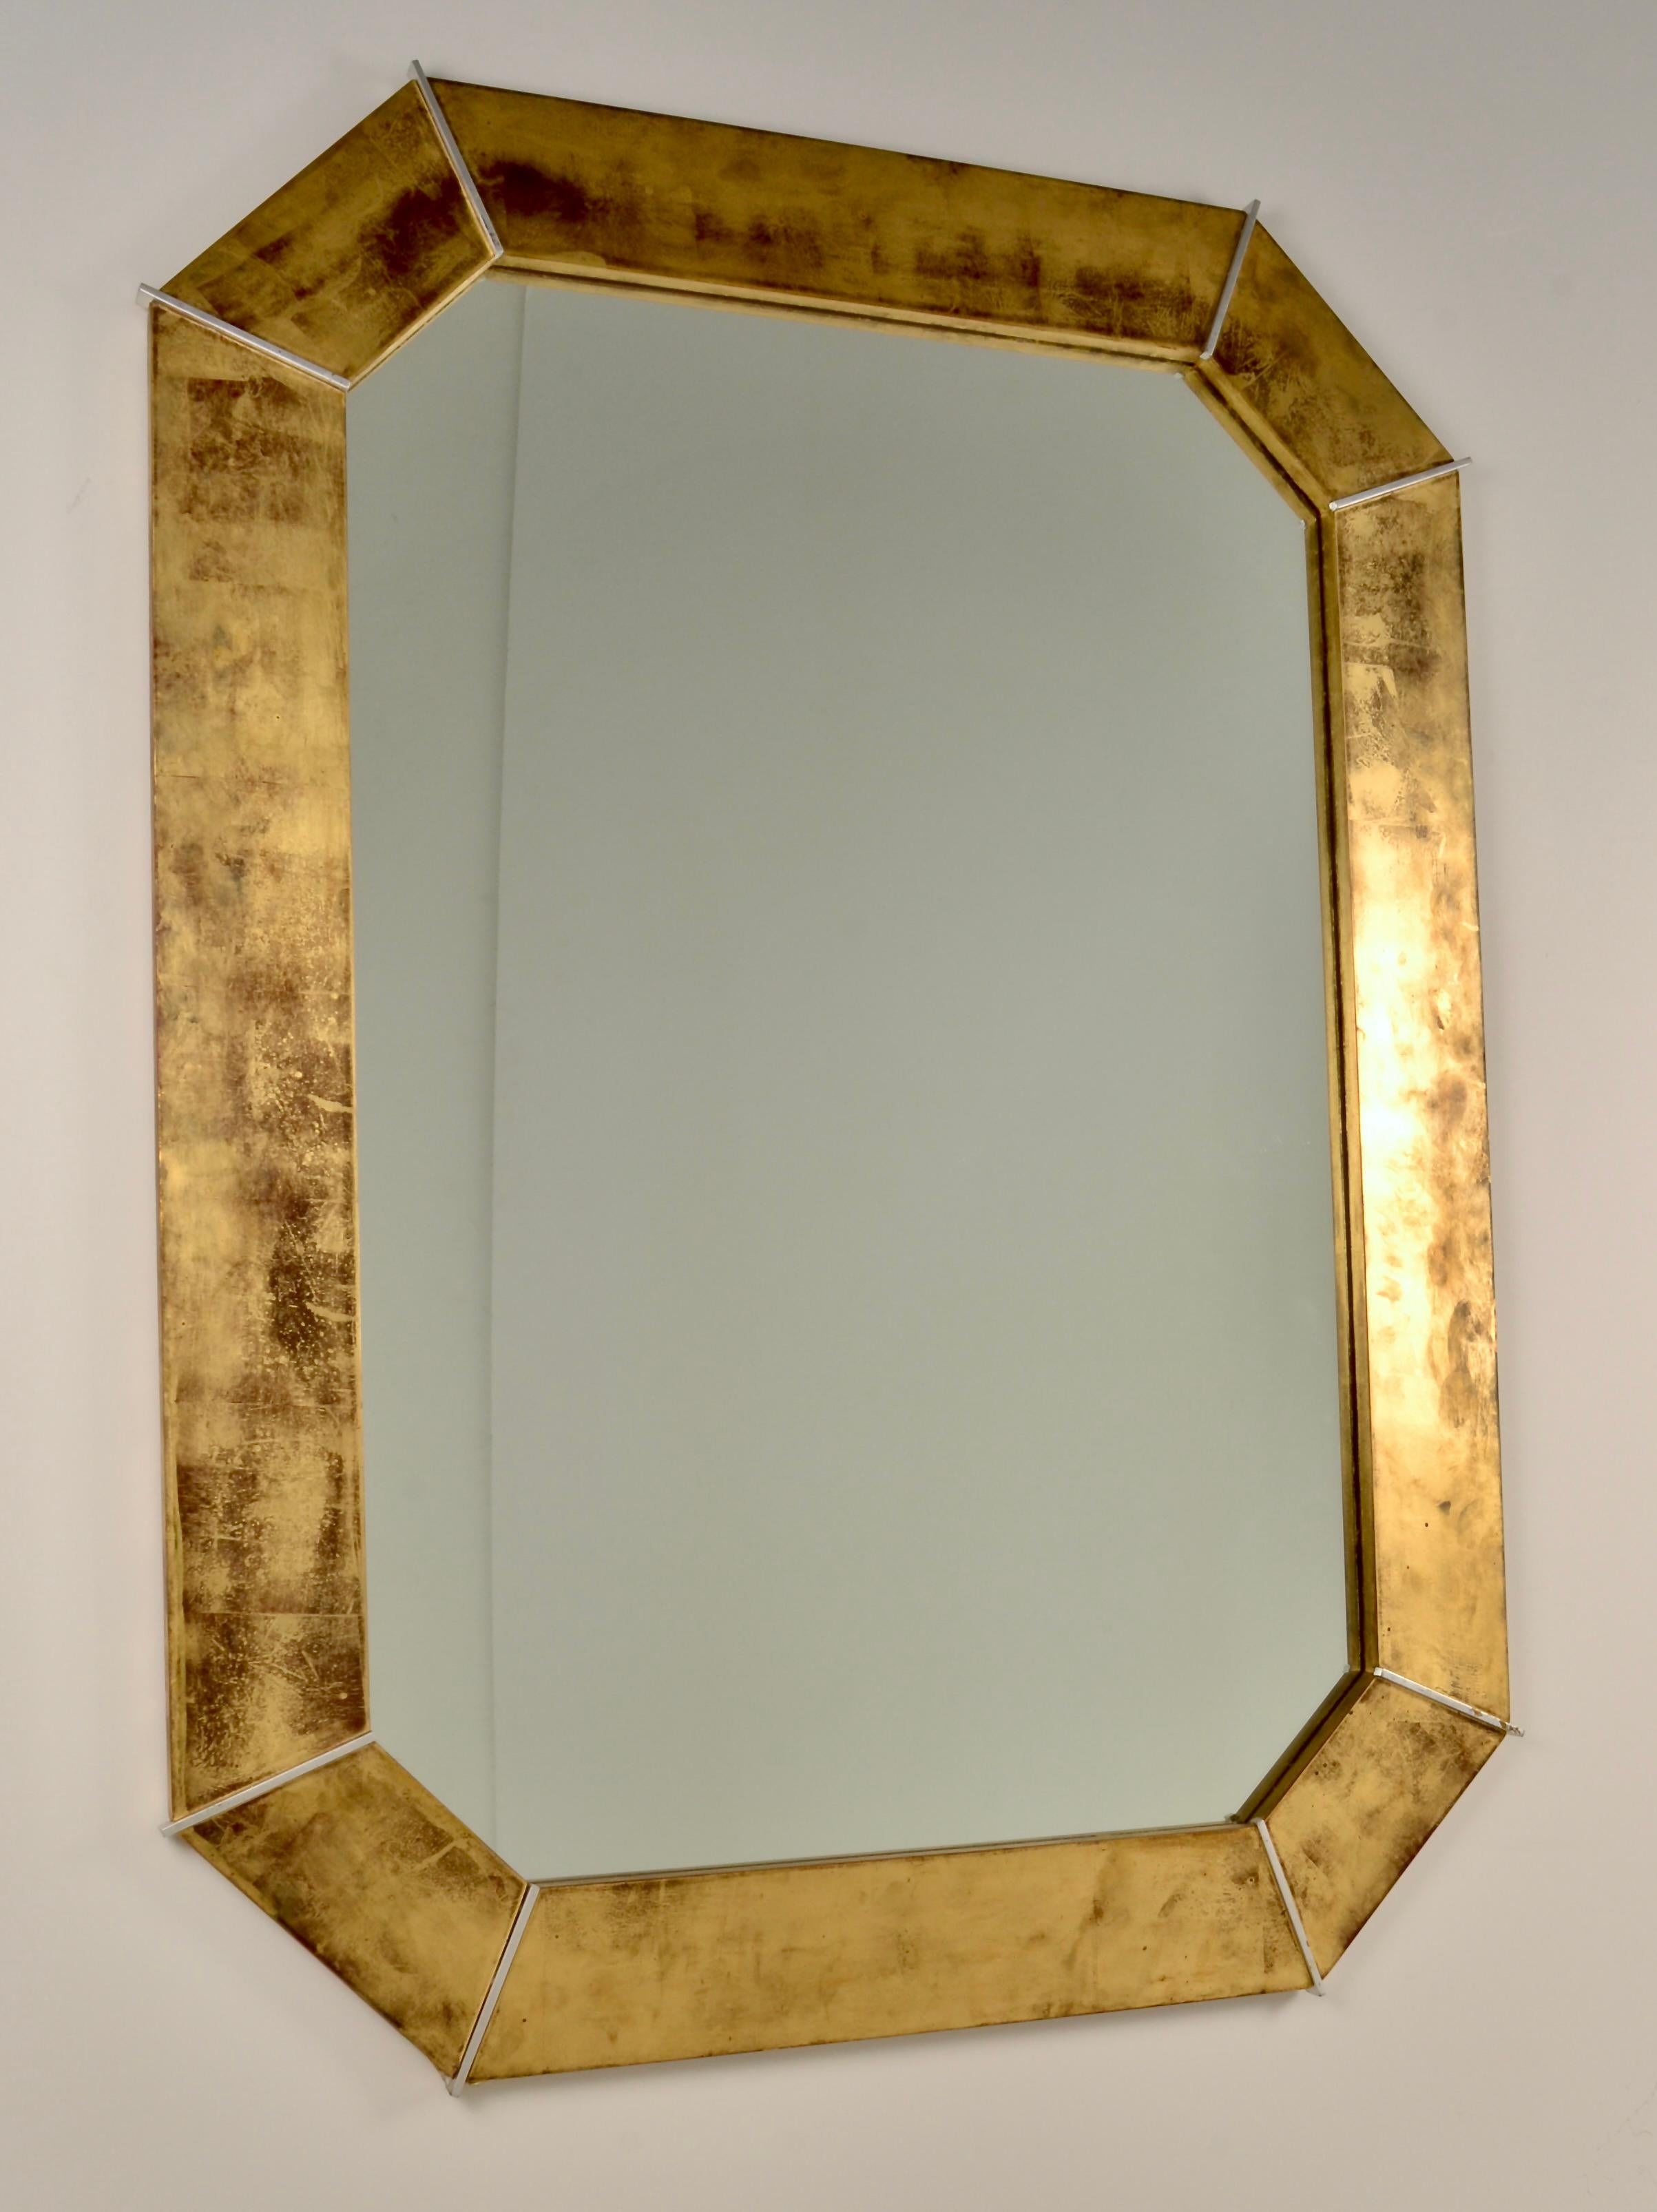 This large scale octagonal mirror by designer Karl Springer features a dramatic custom distressed gold leaf finish over wood, detailed with silver gilt dividers. Crafted with Springer's famously high quality. In very fine condition. 